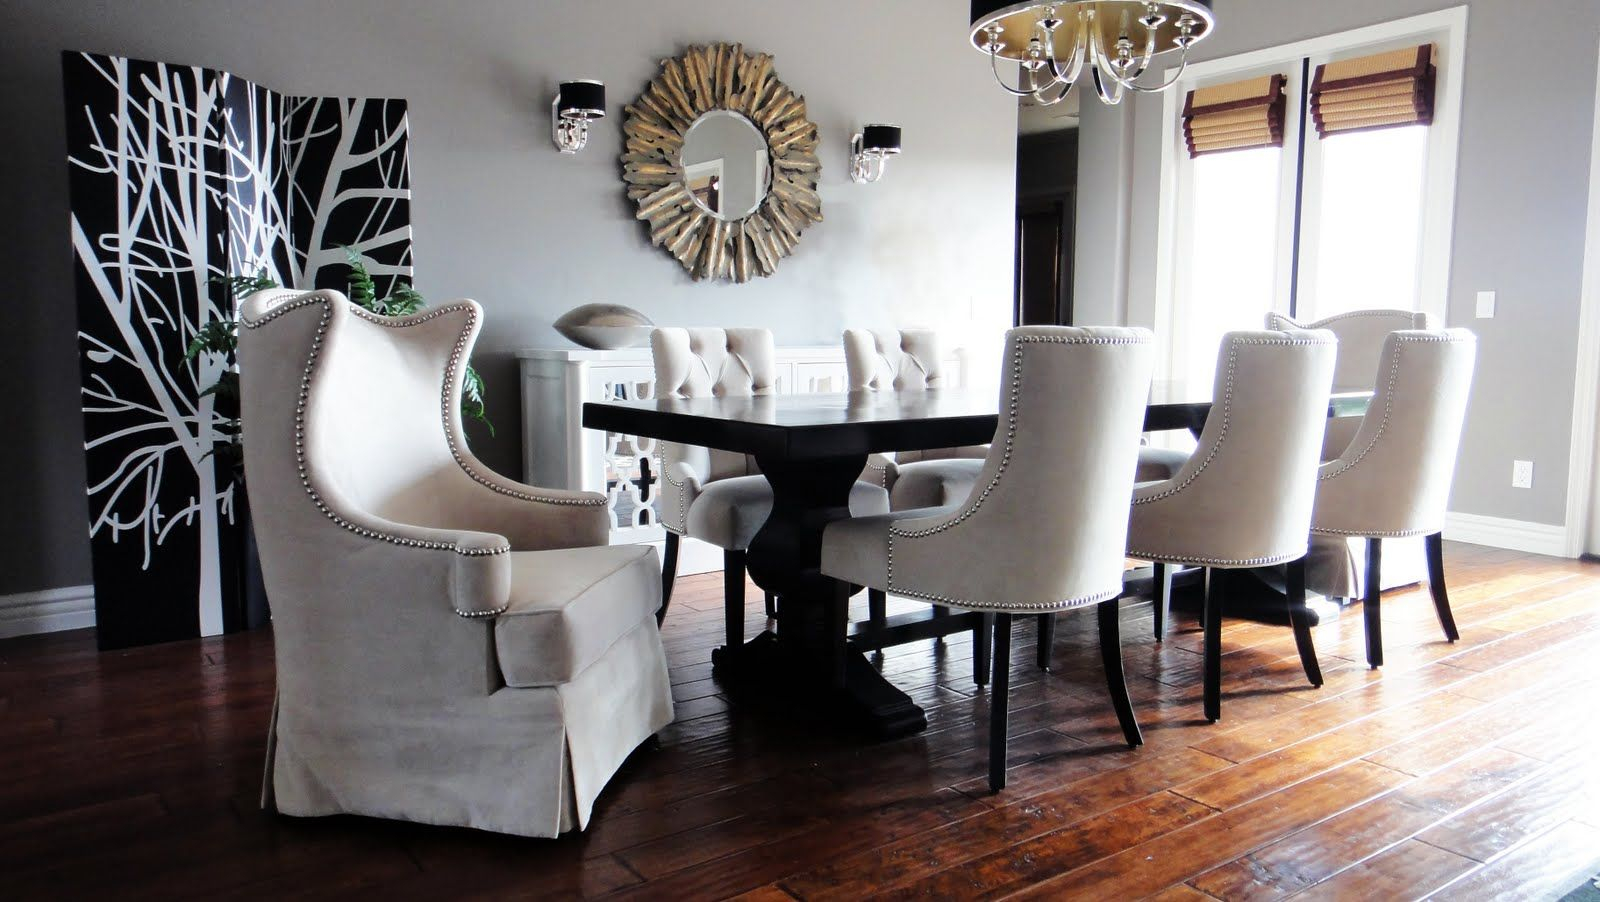 Dining Room Chairs King Queen Dining Room Chairs Queen intended for dimensions 1600 X 902